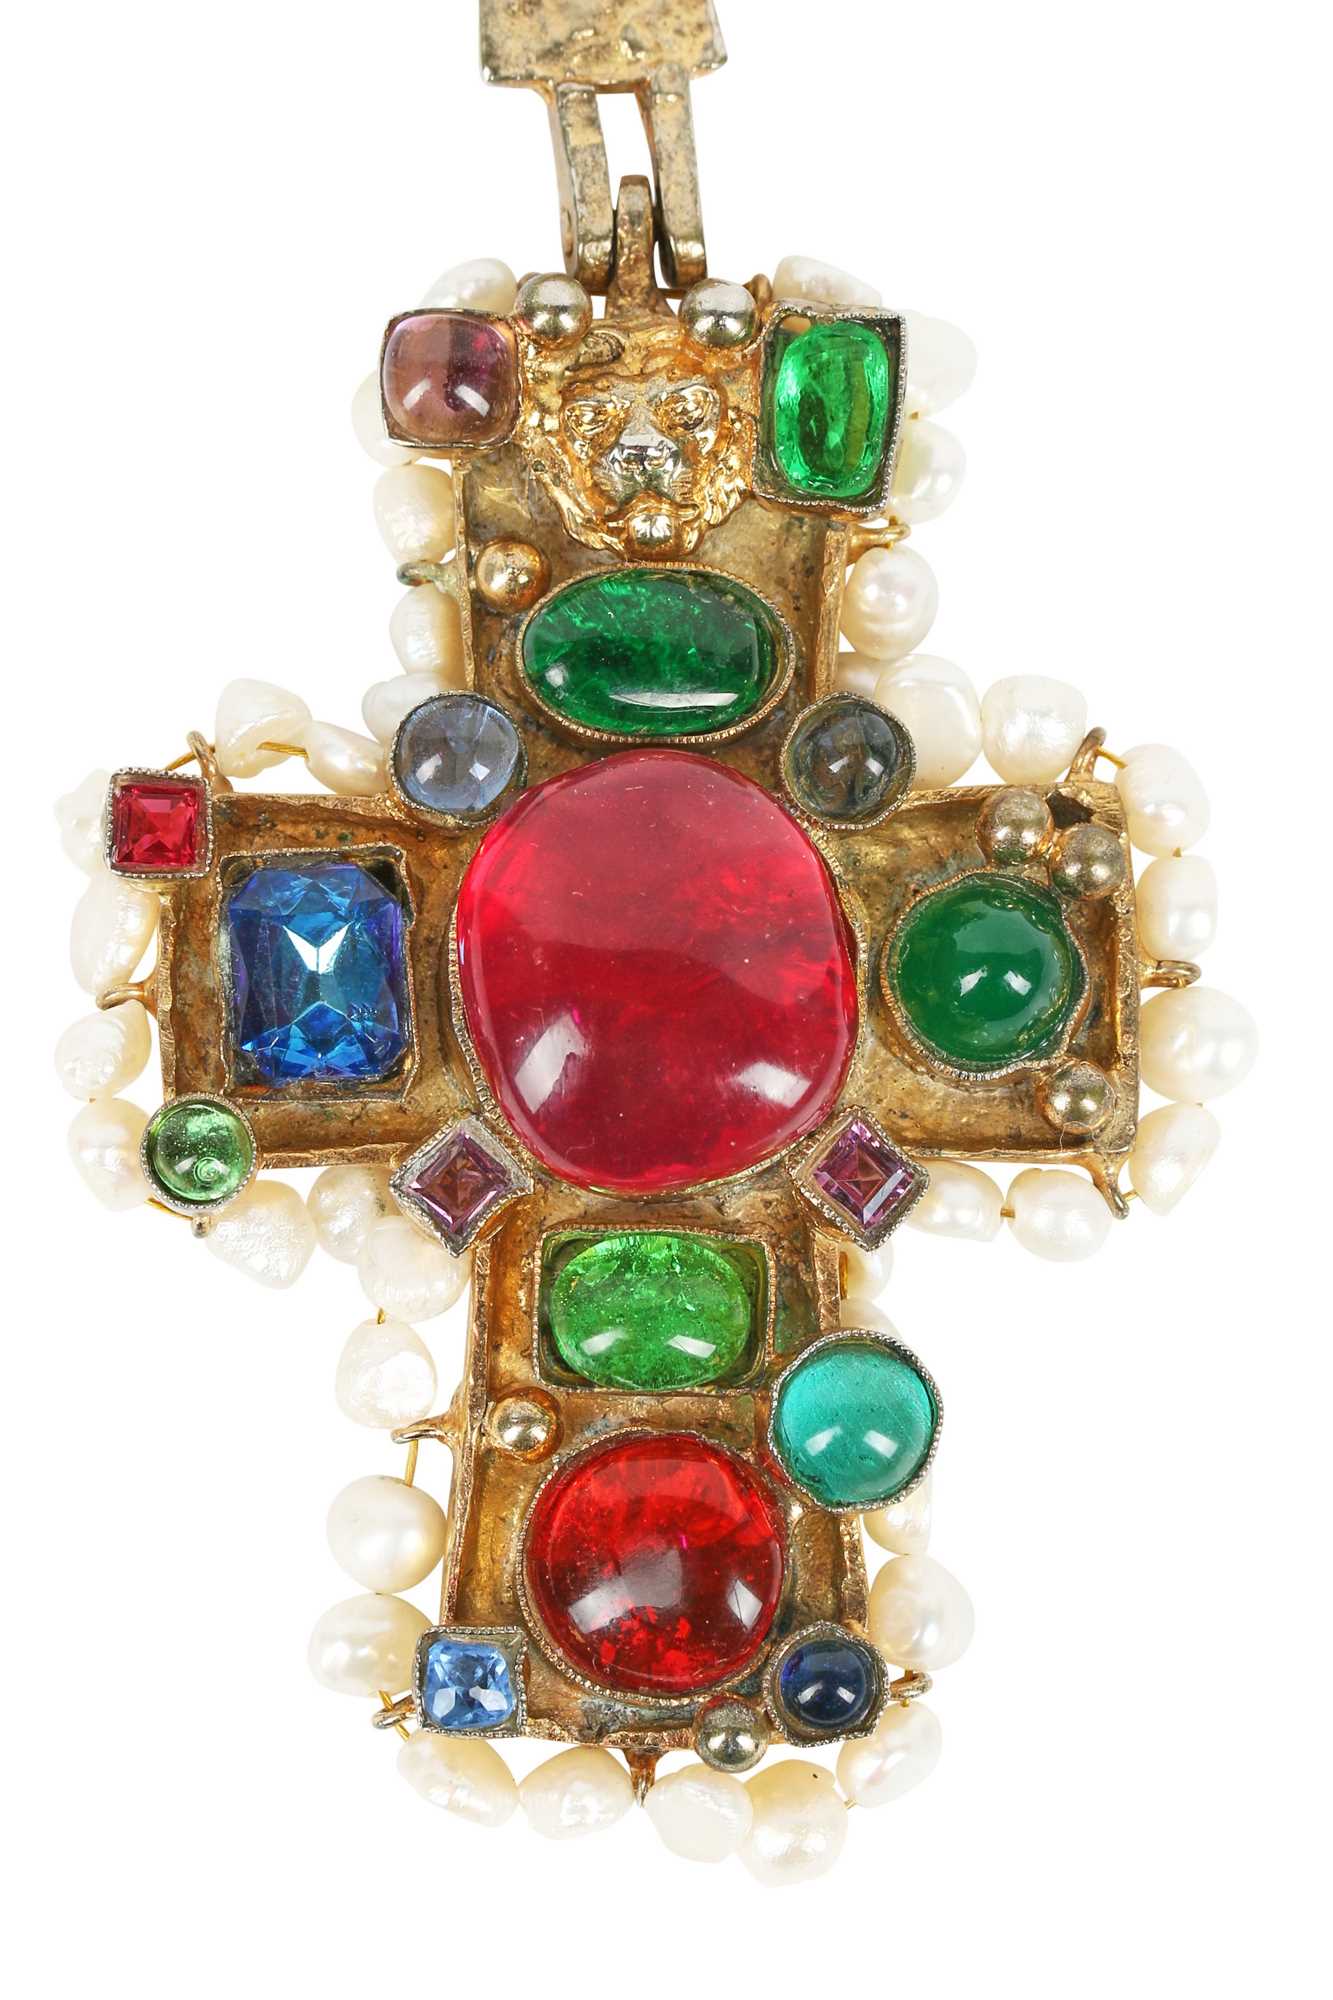 Lot 14 - A fine Chanel gilt chain necklace with large bejewelled crucifix pendant, 1971-1981